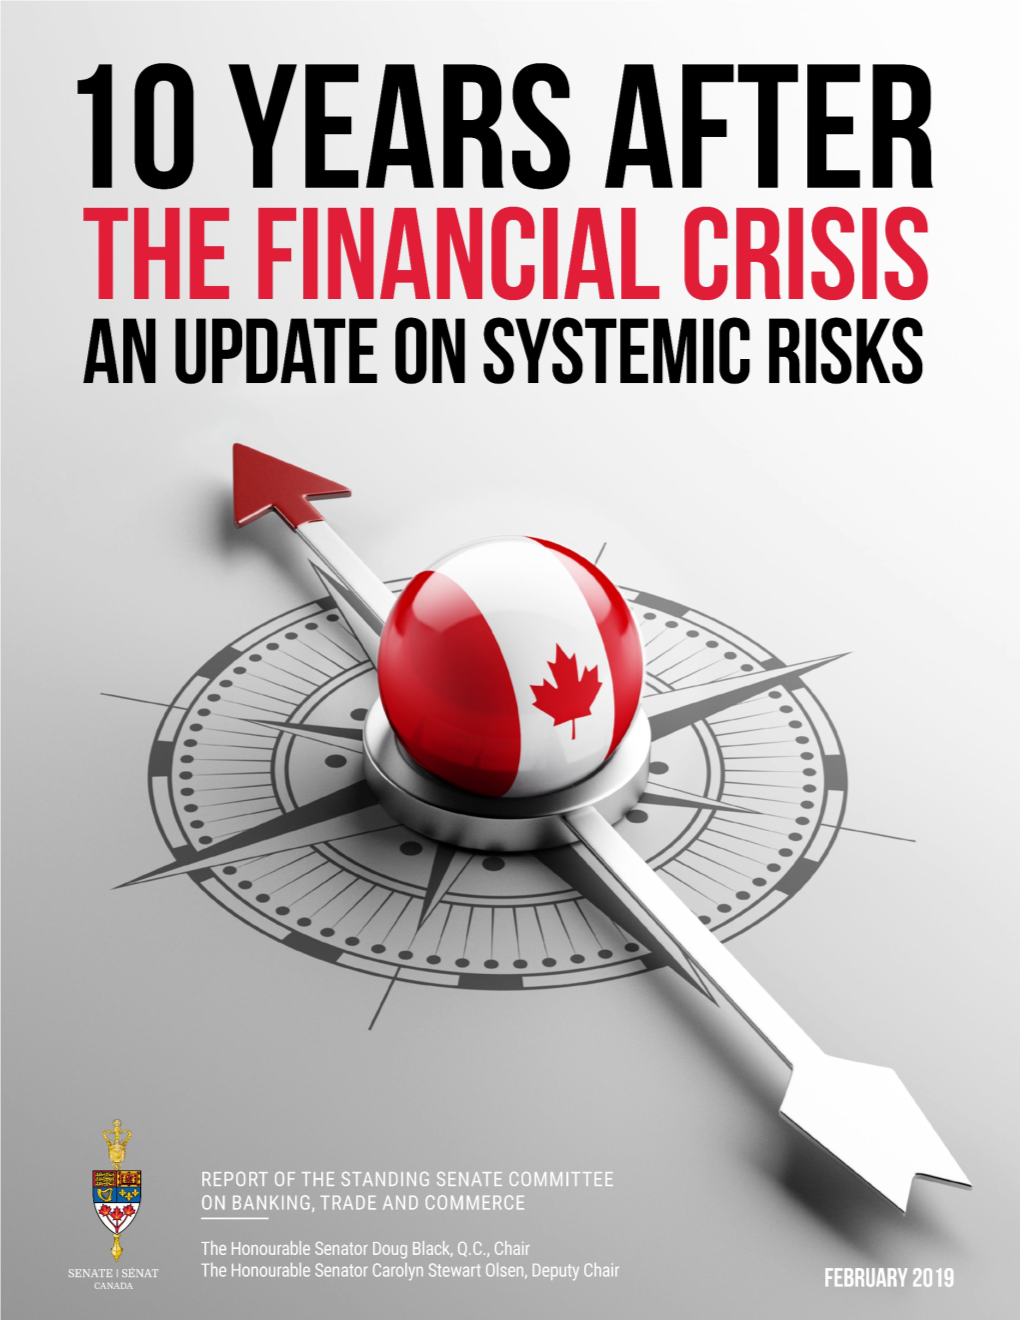 An Update on Systemic Risks